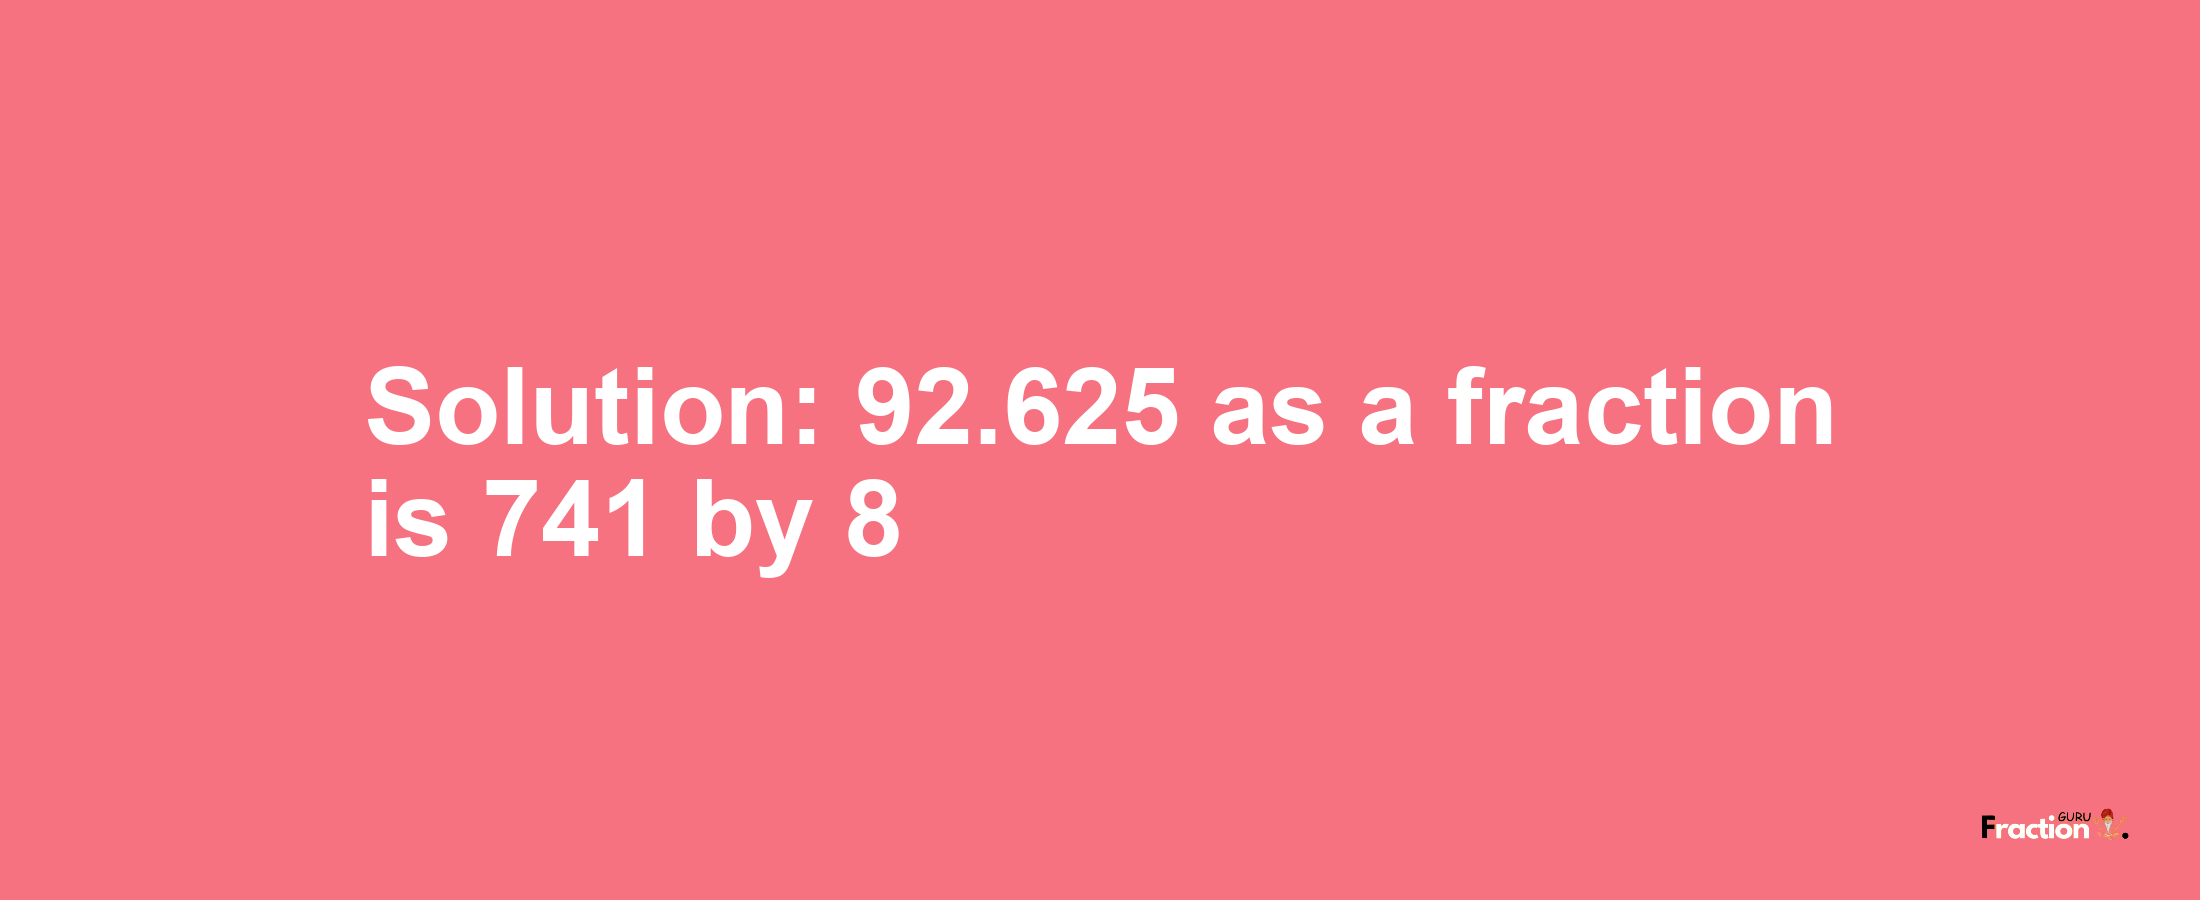 Solution:92.625 as a fraction is 741/8